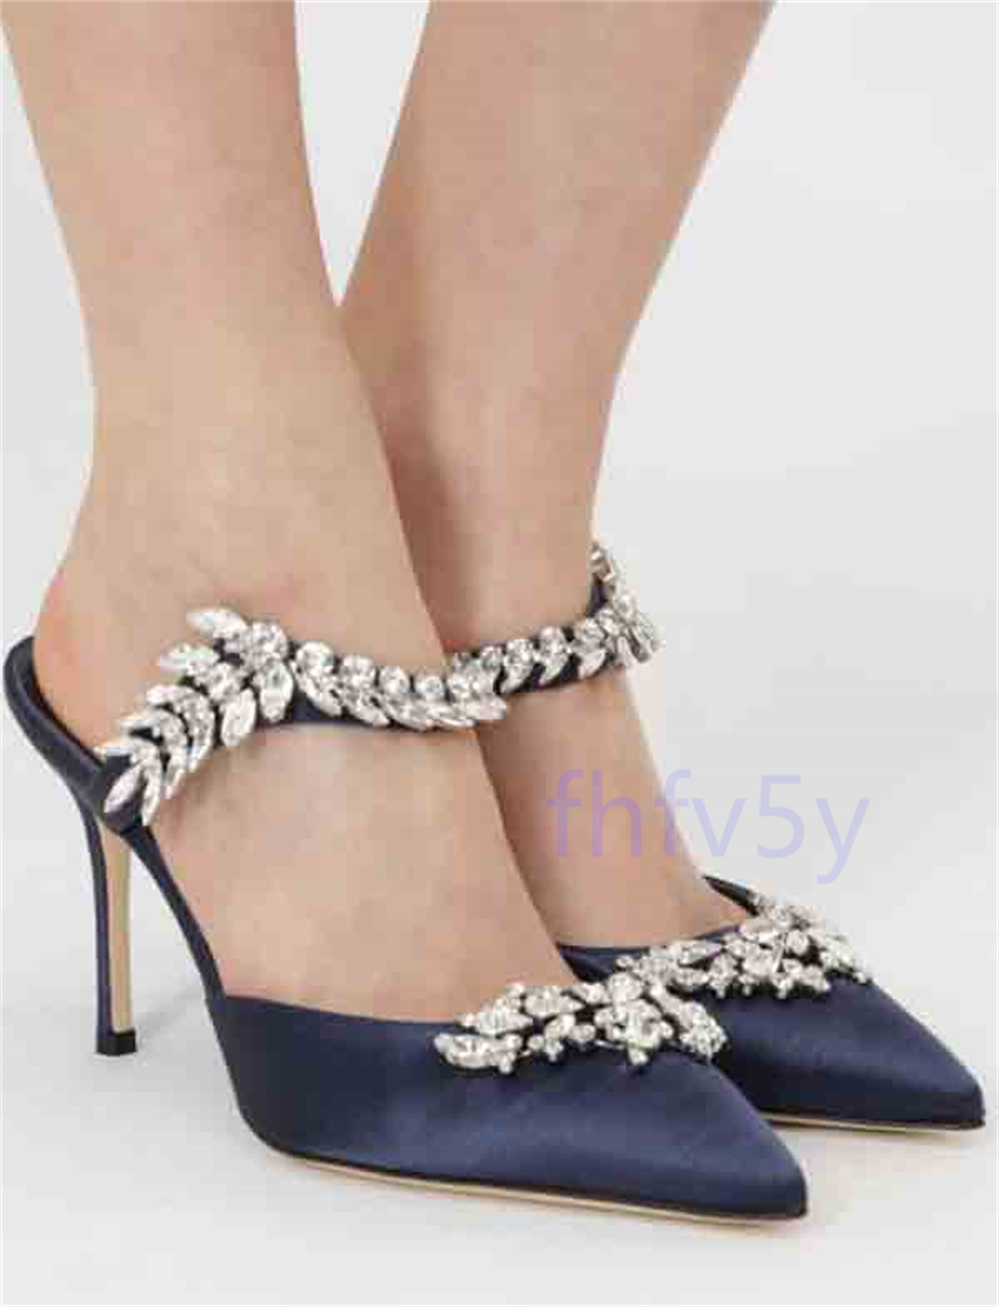 luxury Women dress shoes pump slipper sandals strass high heel shoes Lurum Crystal-Embellished Satin Mules sexy pointed toe party wedding pumps